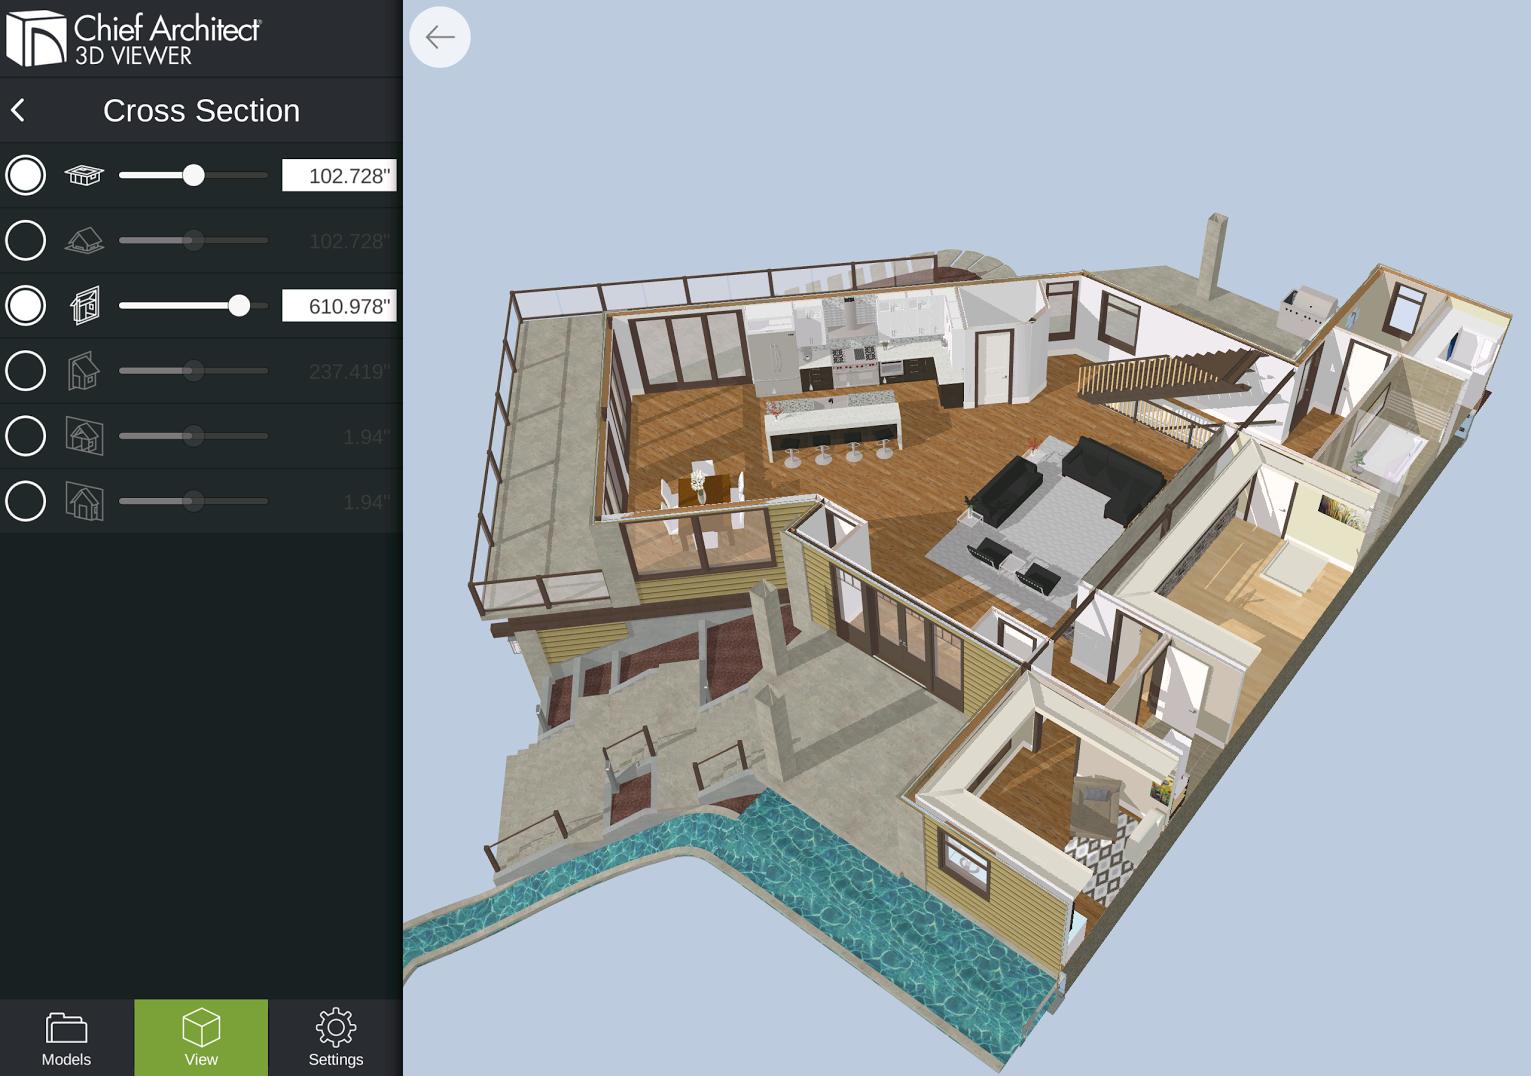 3D Viewer by Chief Architect